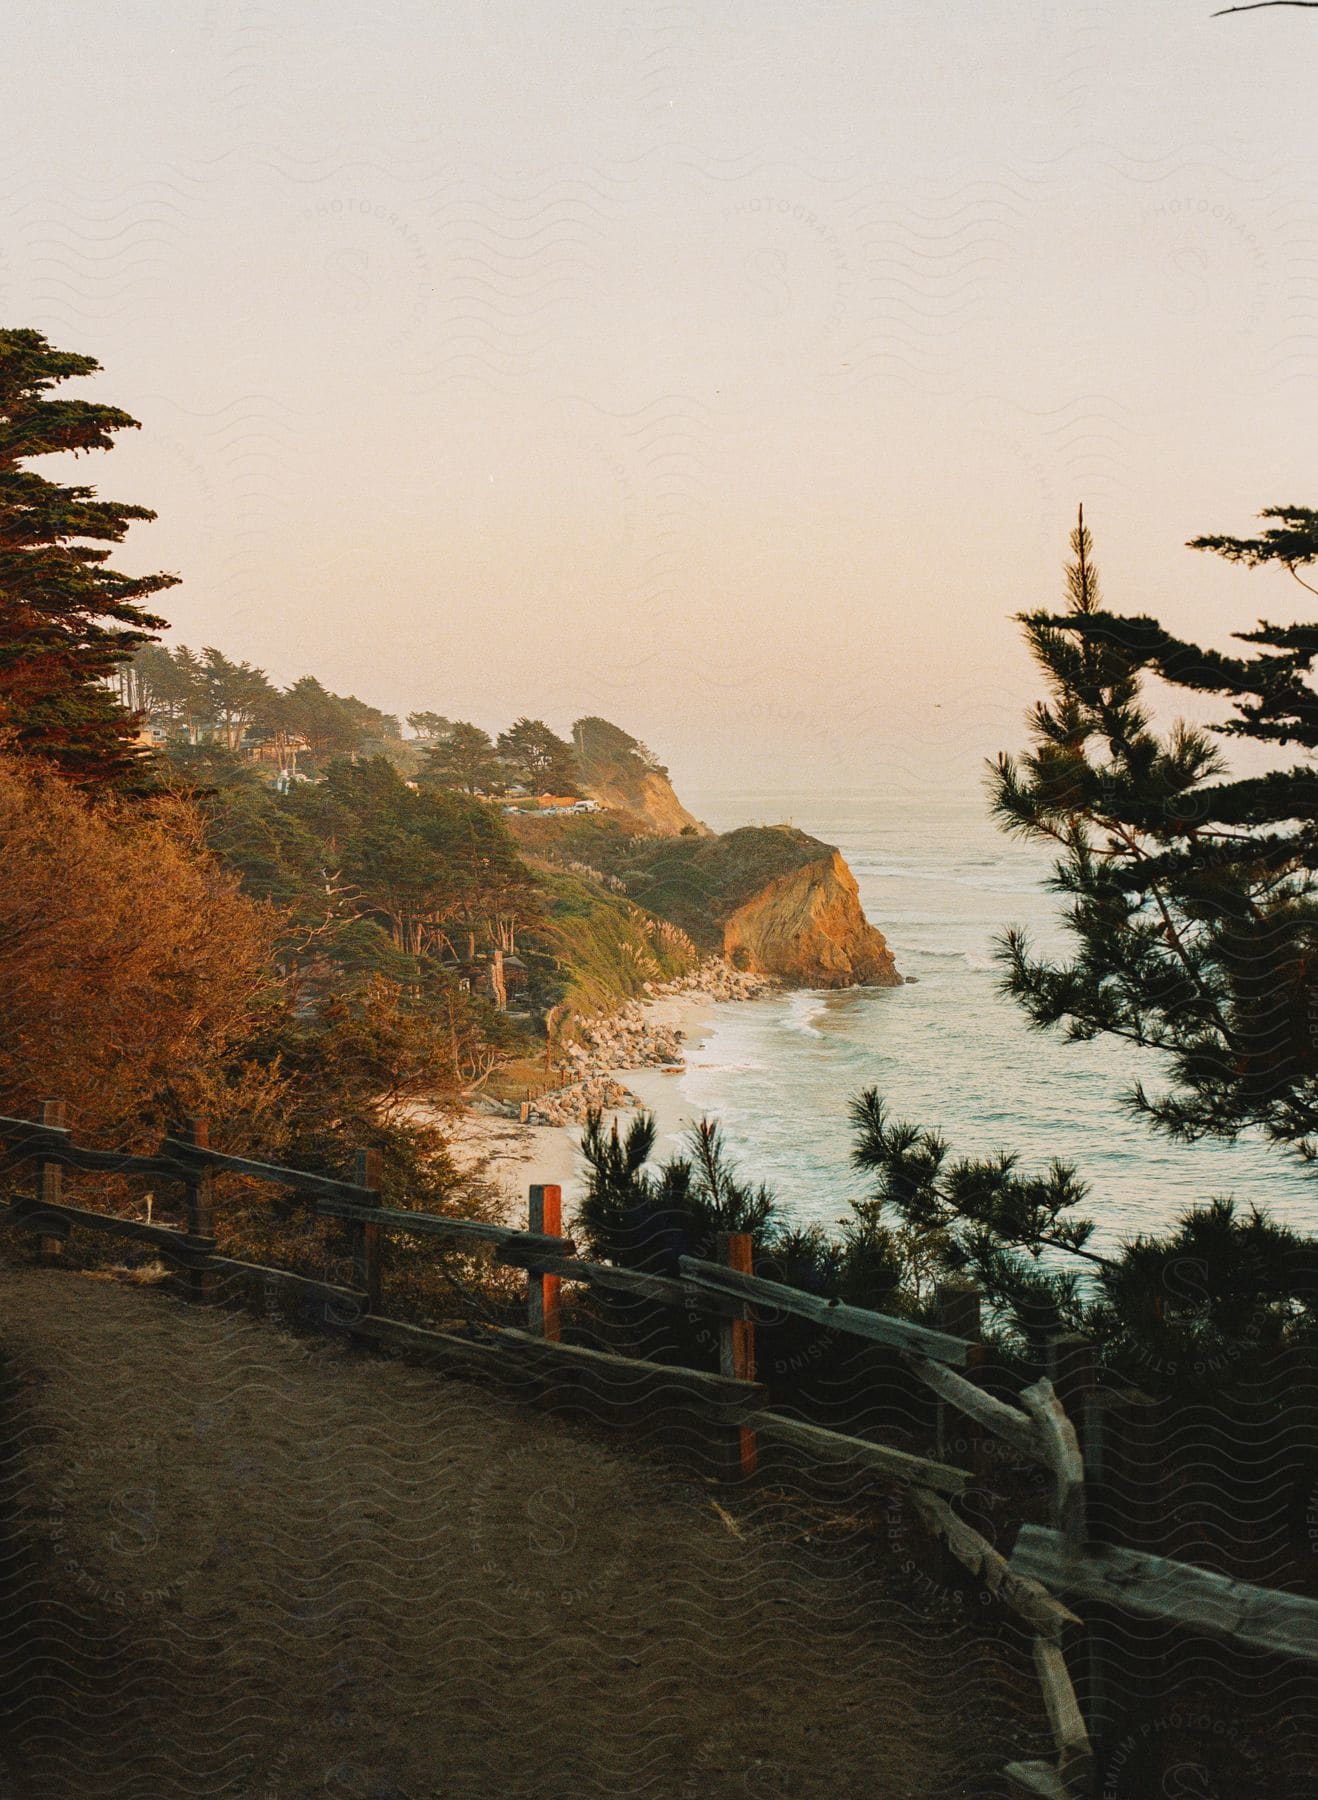 A fence blocks a cliff overlooking the waterfront with trees in fall colors as waves roll into shore